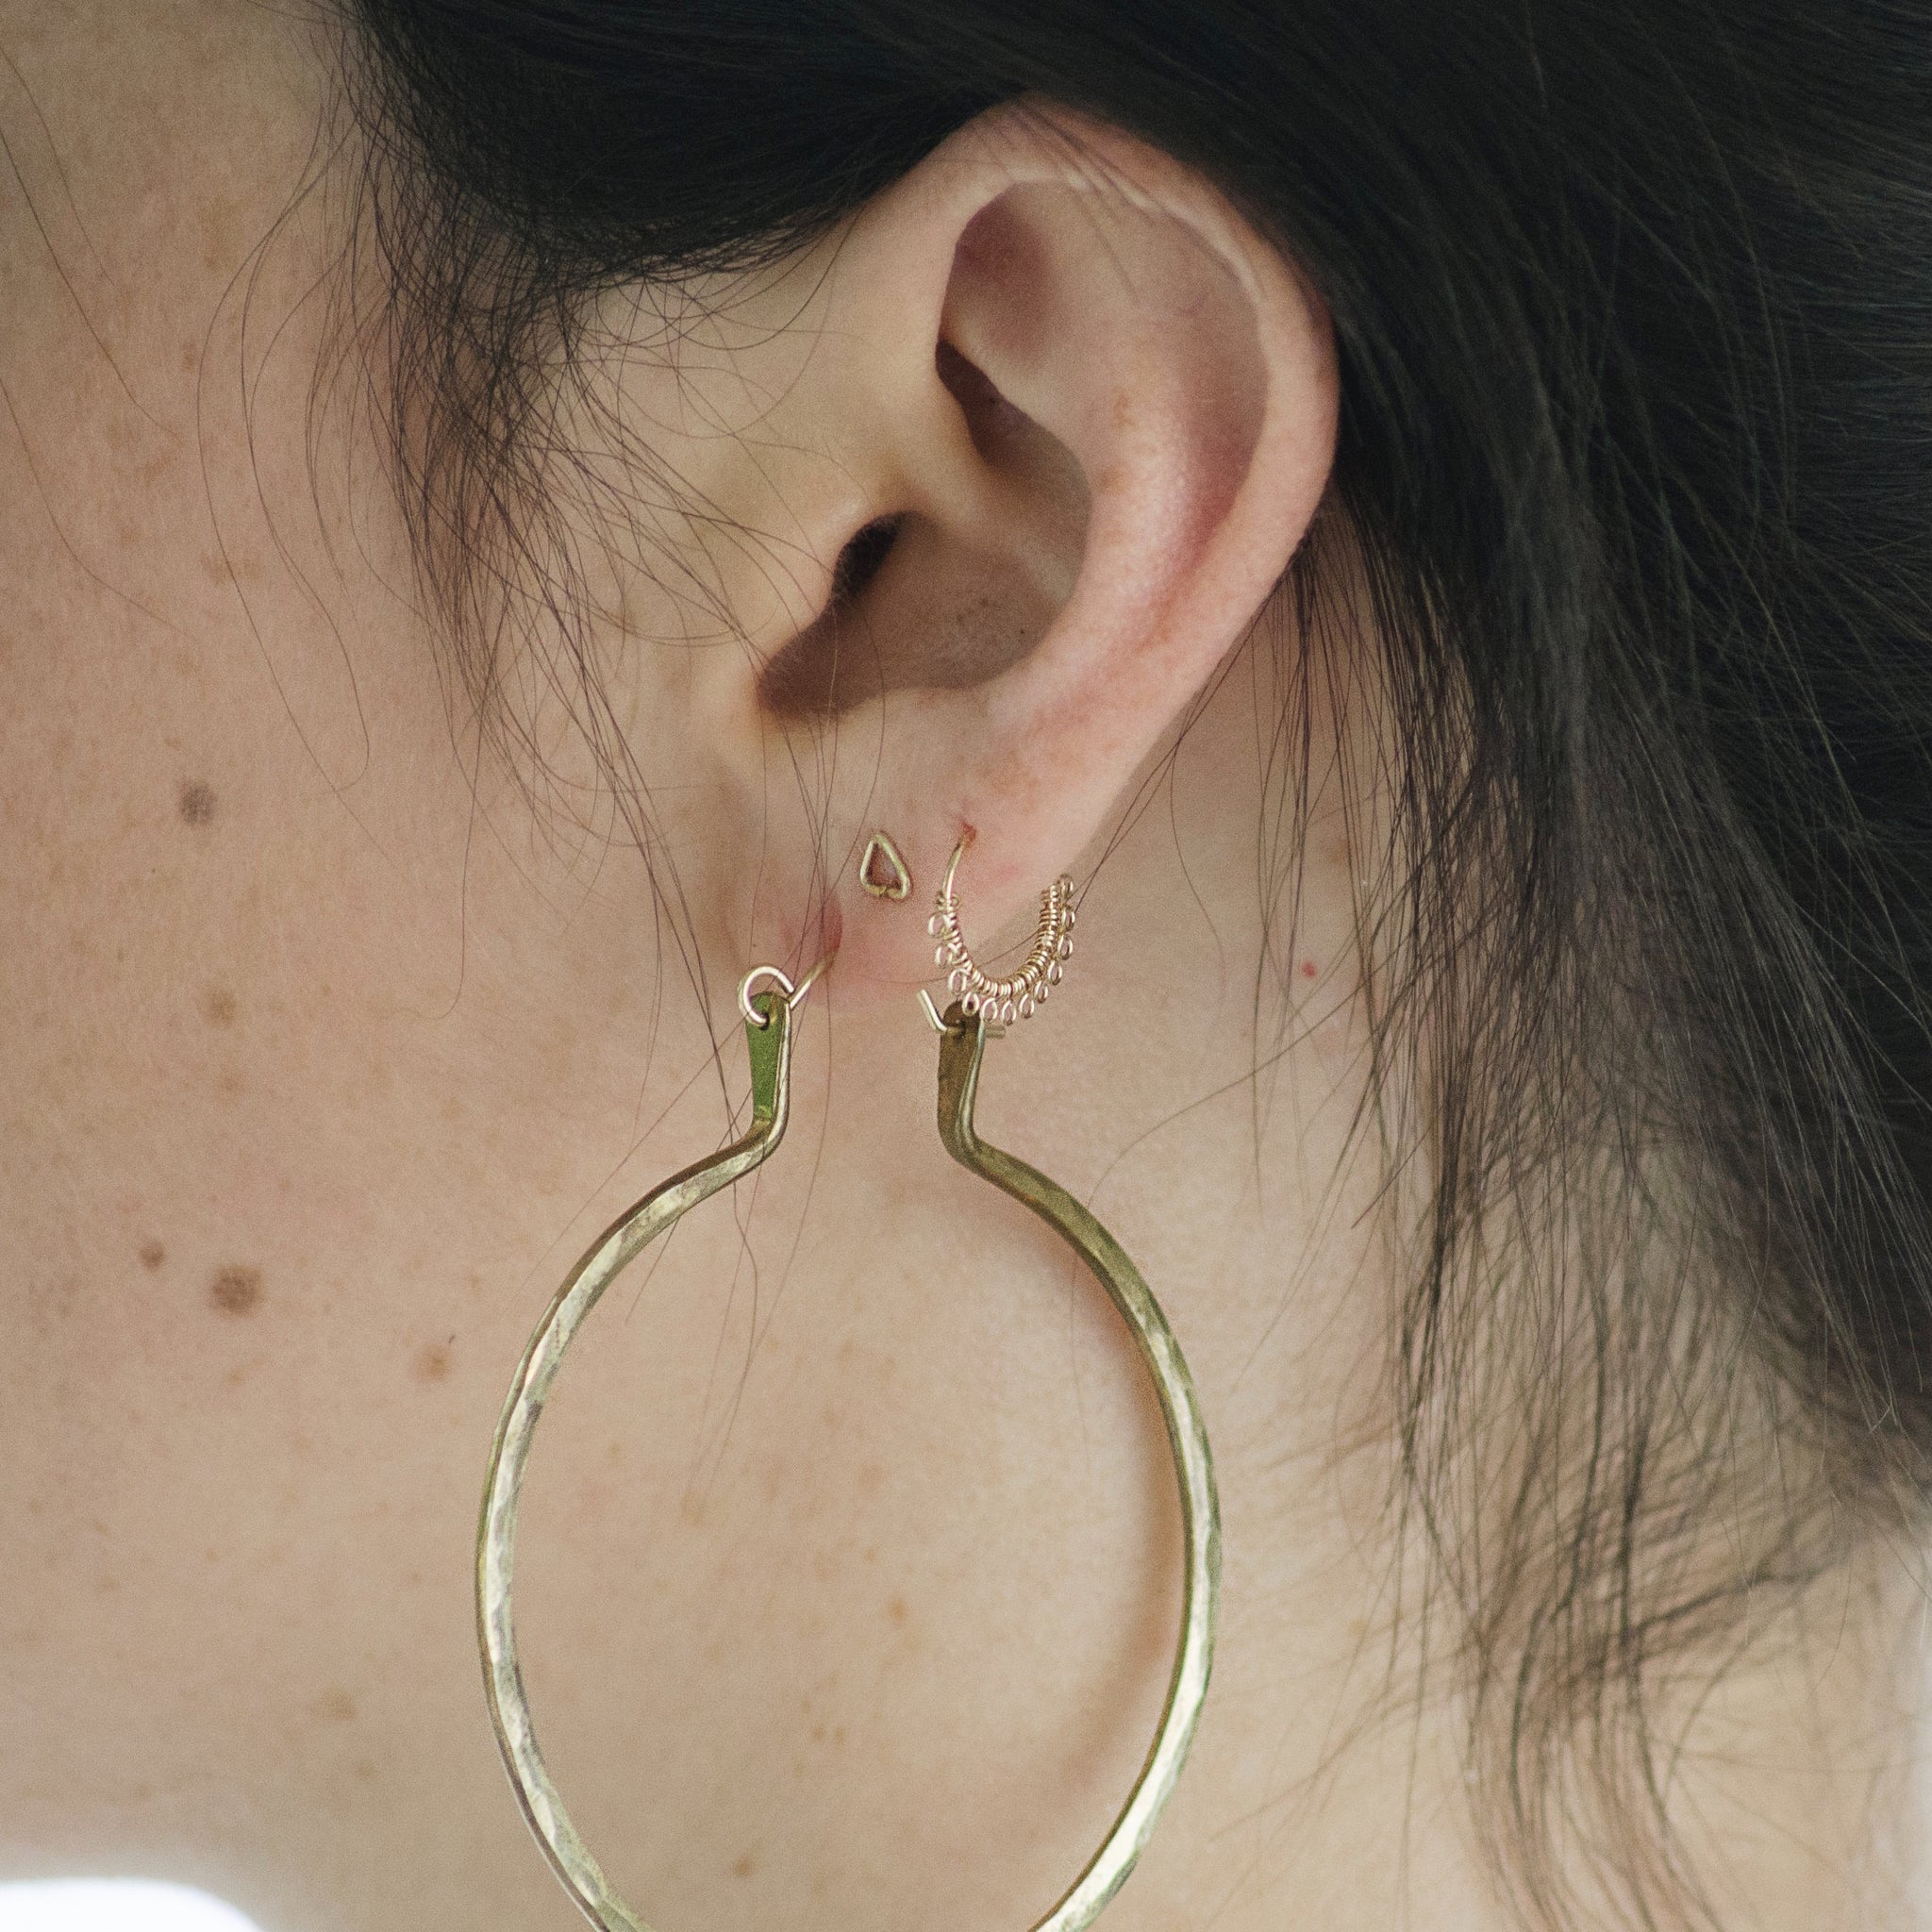 Amazon.com: Nose Ring, 14K Solid Yellow Gold Tribal Asymmetric Nose Hoop,  Fits Cartilage, Helix, Tragus Earring, Handmade Piercing Jewelry, 20g-21g :  Handmade Products